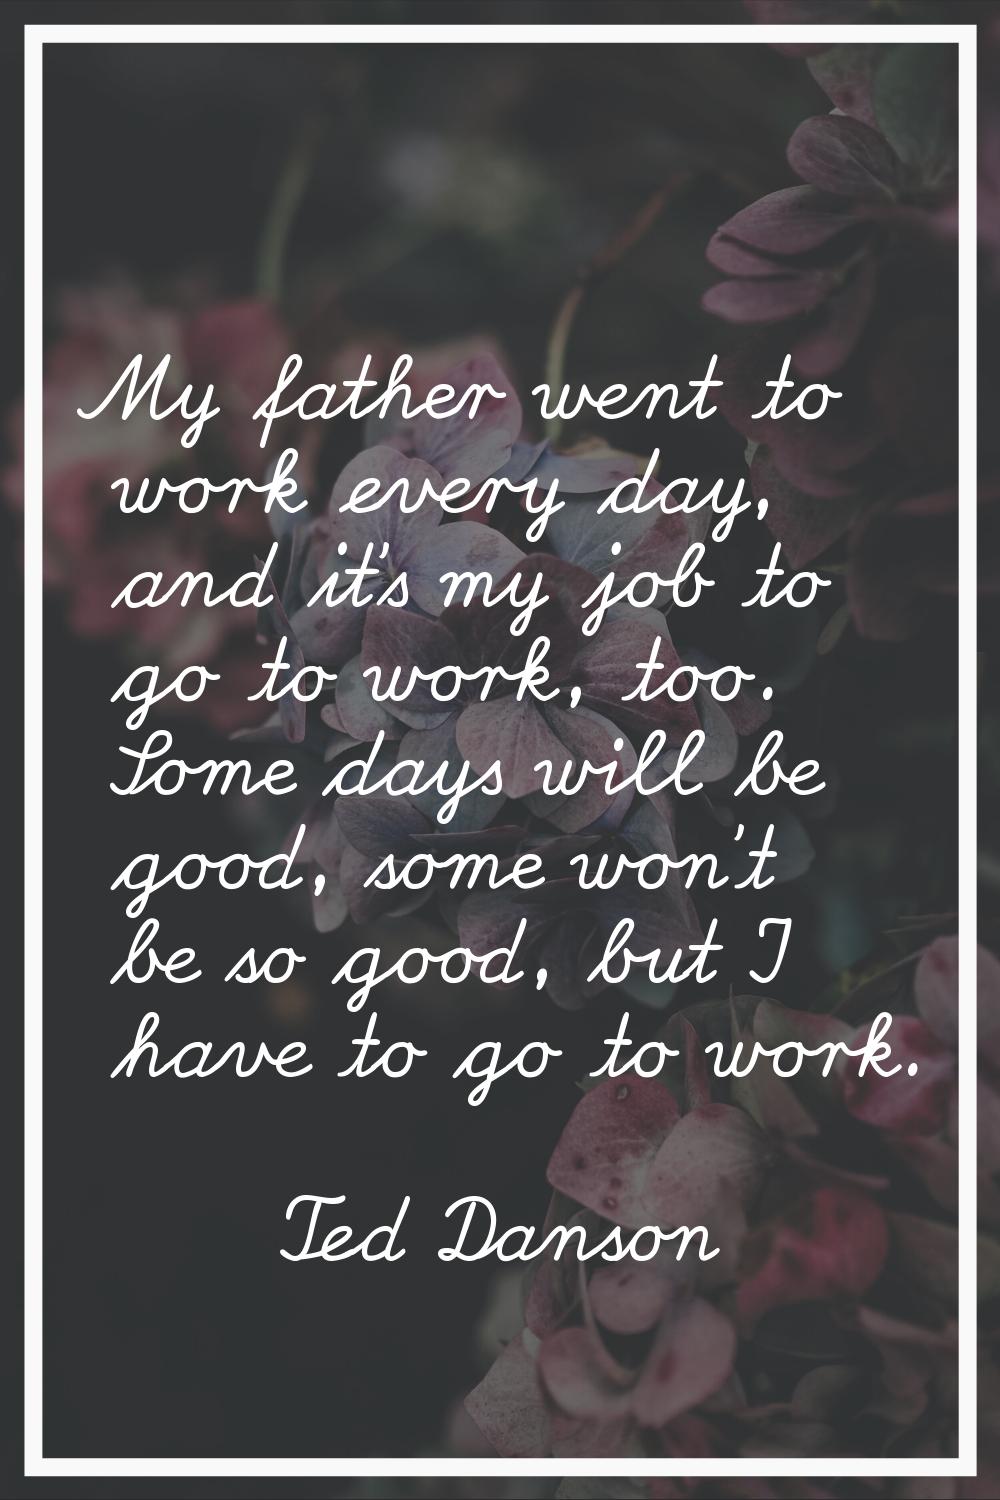 My father went to work every day, and it's my job to go to work, too. Some days will be good, some 